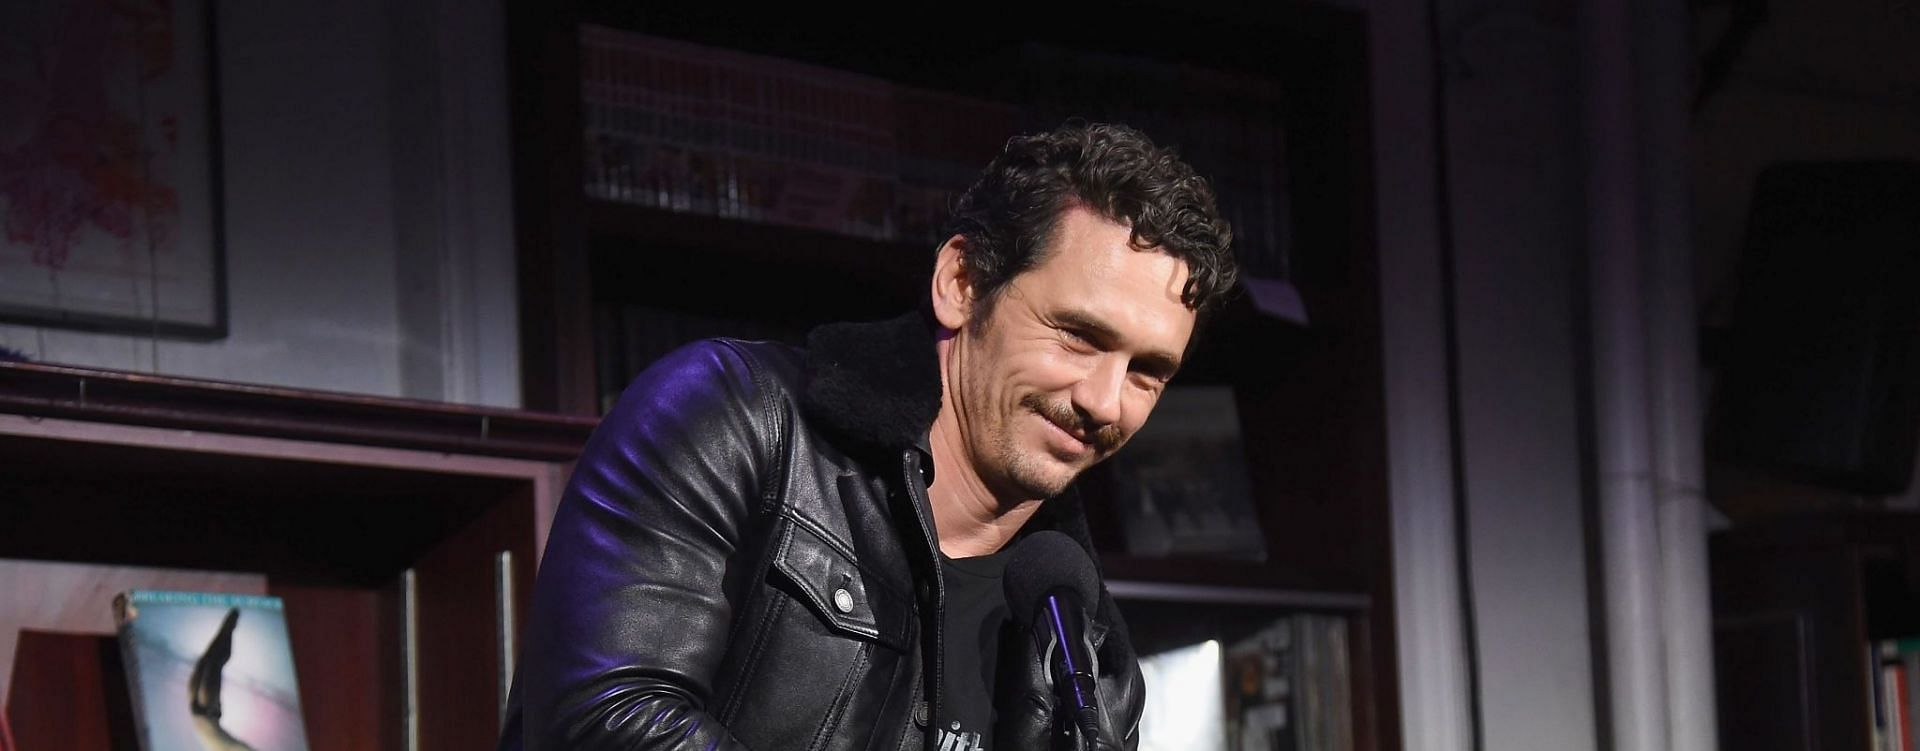 James Franco acknowledged allegations of misconduct made against him in 2019 (Image via Gary Gershoff/Getty Images)